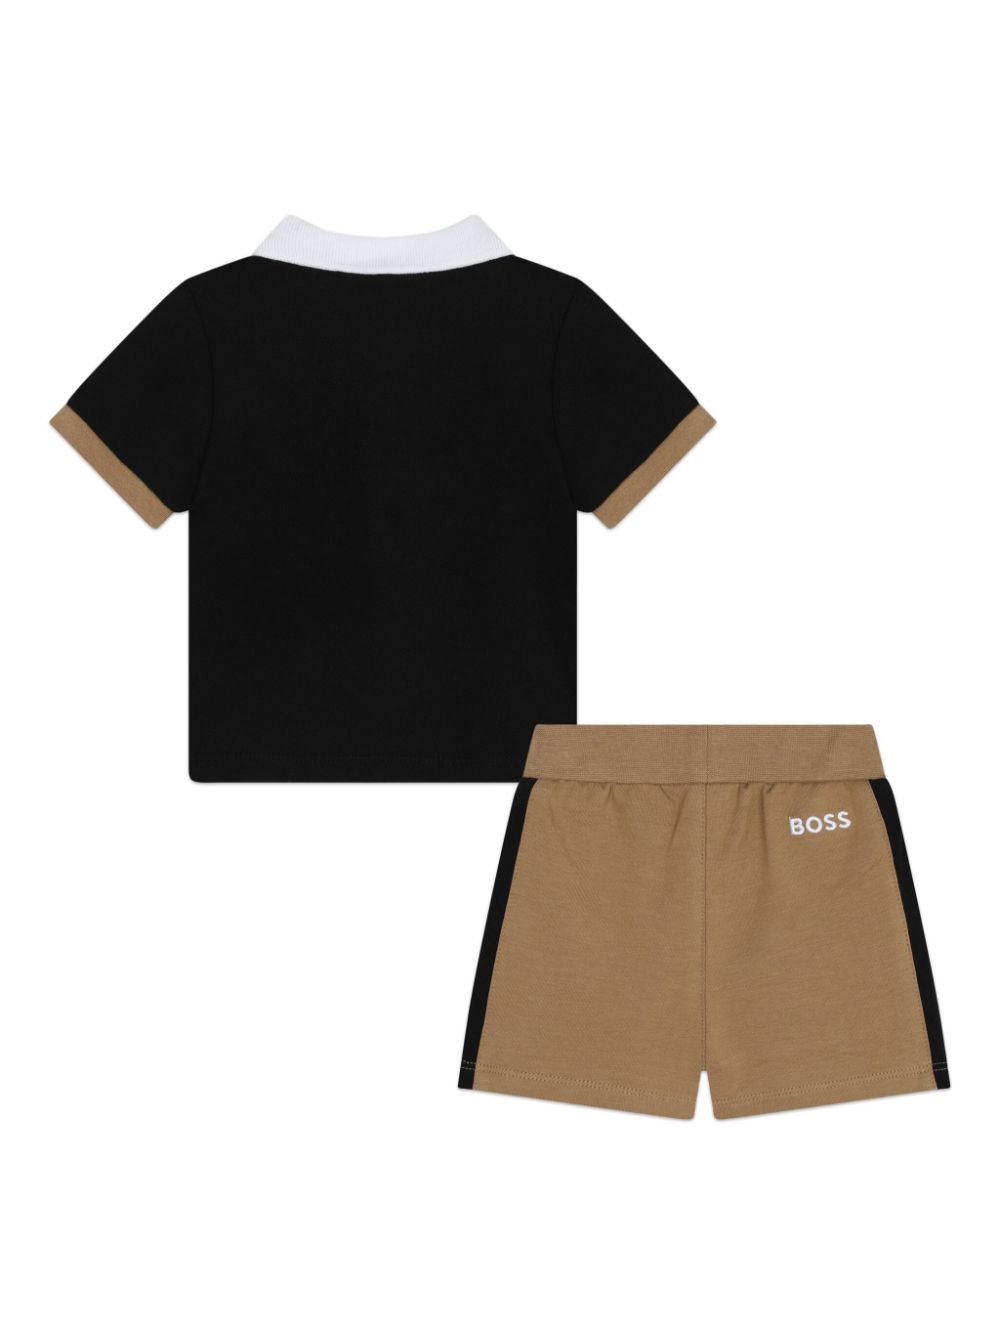 Black and beige sports outfit for newborns